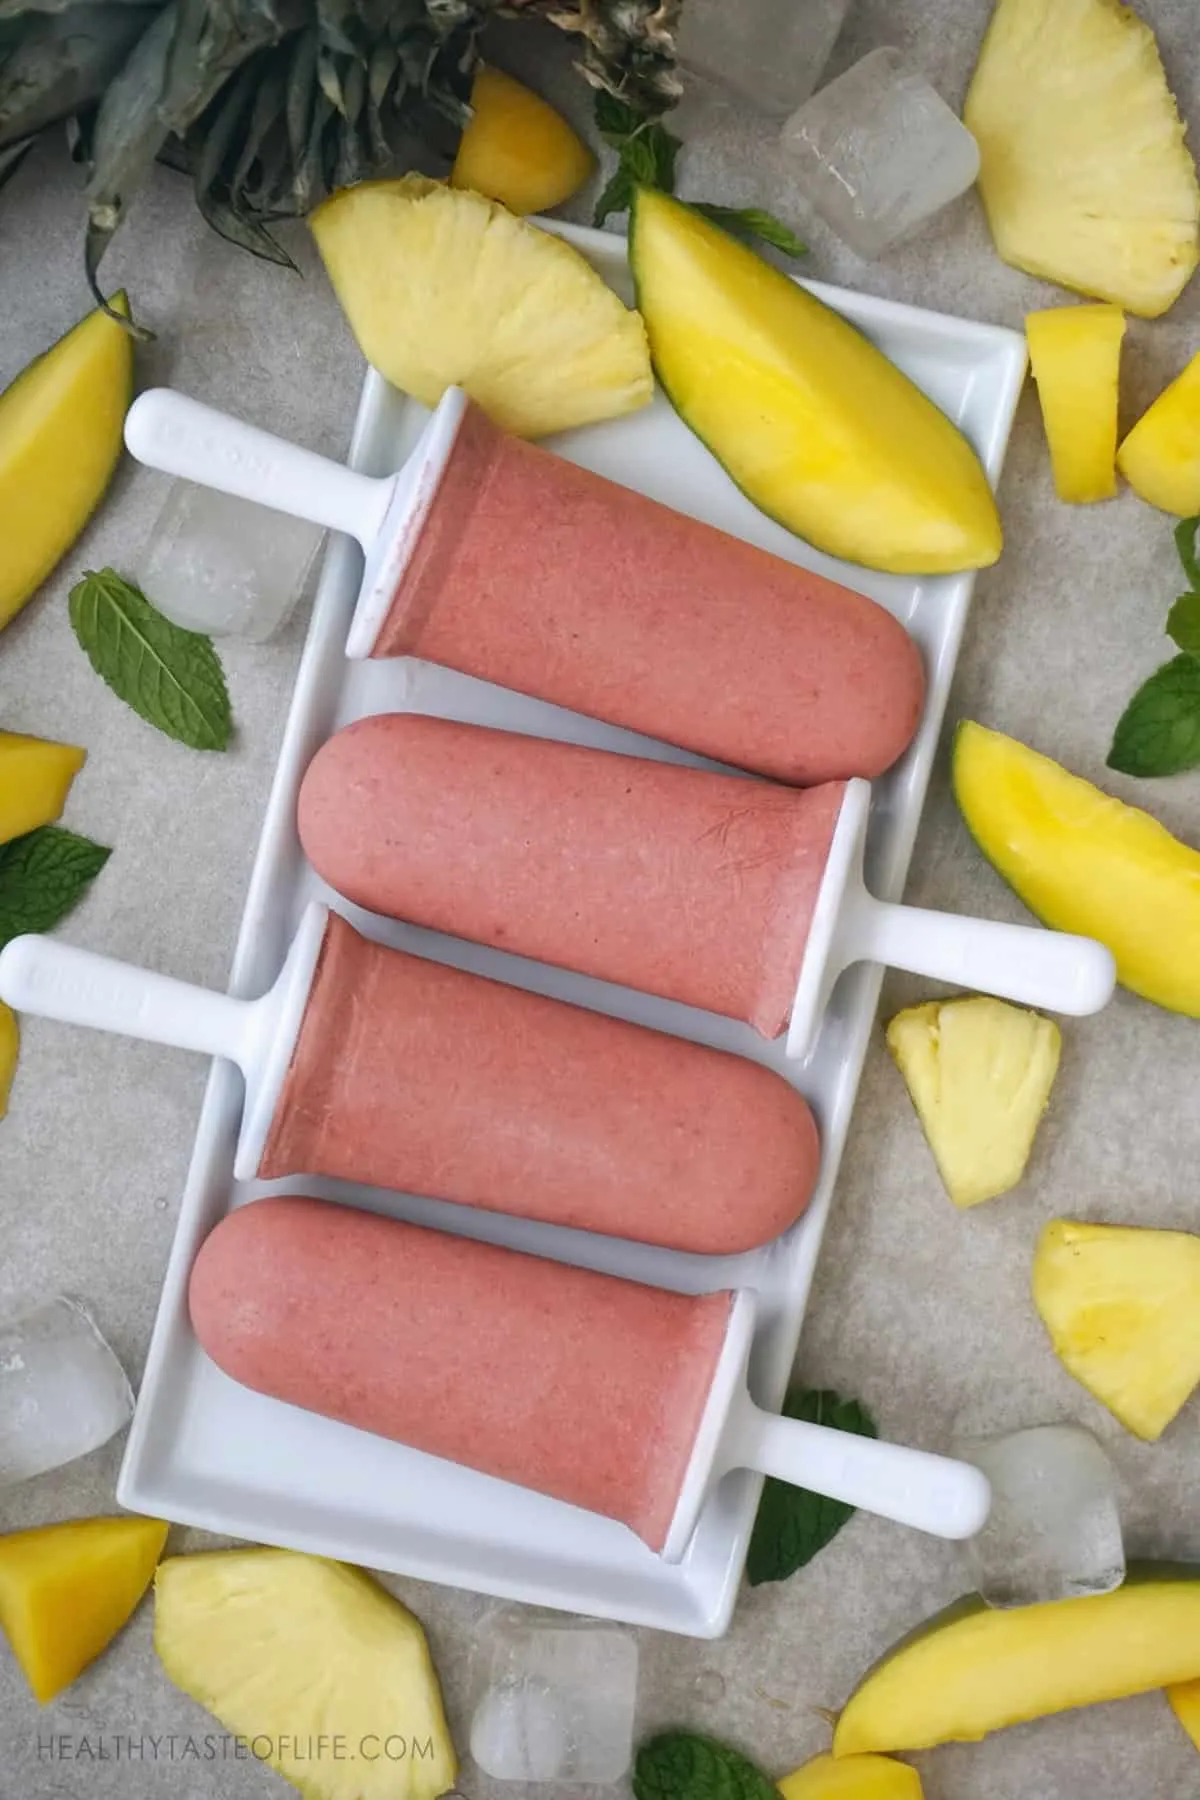 Healthy, easy tropical fruit popsicles - made with all real fruit and no added sugar. A delicious homemade popsicle recipe for kids or adults. These tropical popsicles are vegan, paleo and whole30 friendly. #popsicles #sugarfreepopsicles #popsiclerecipes